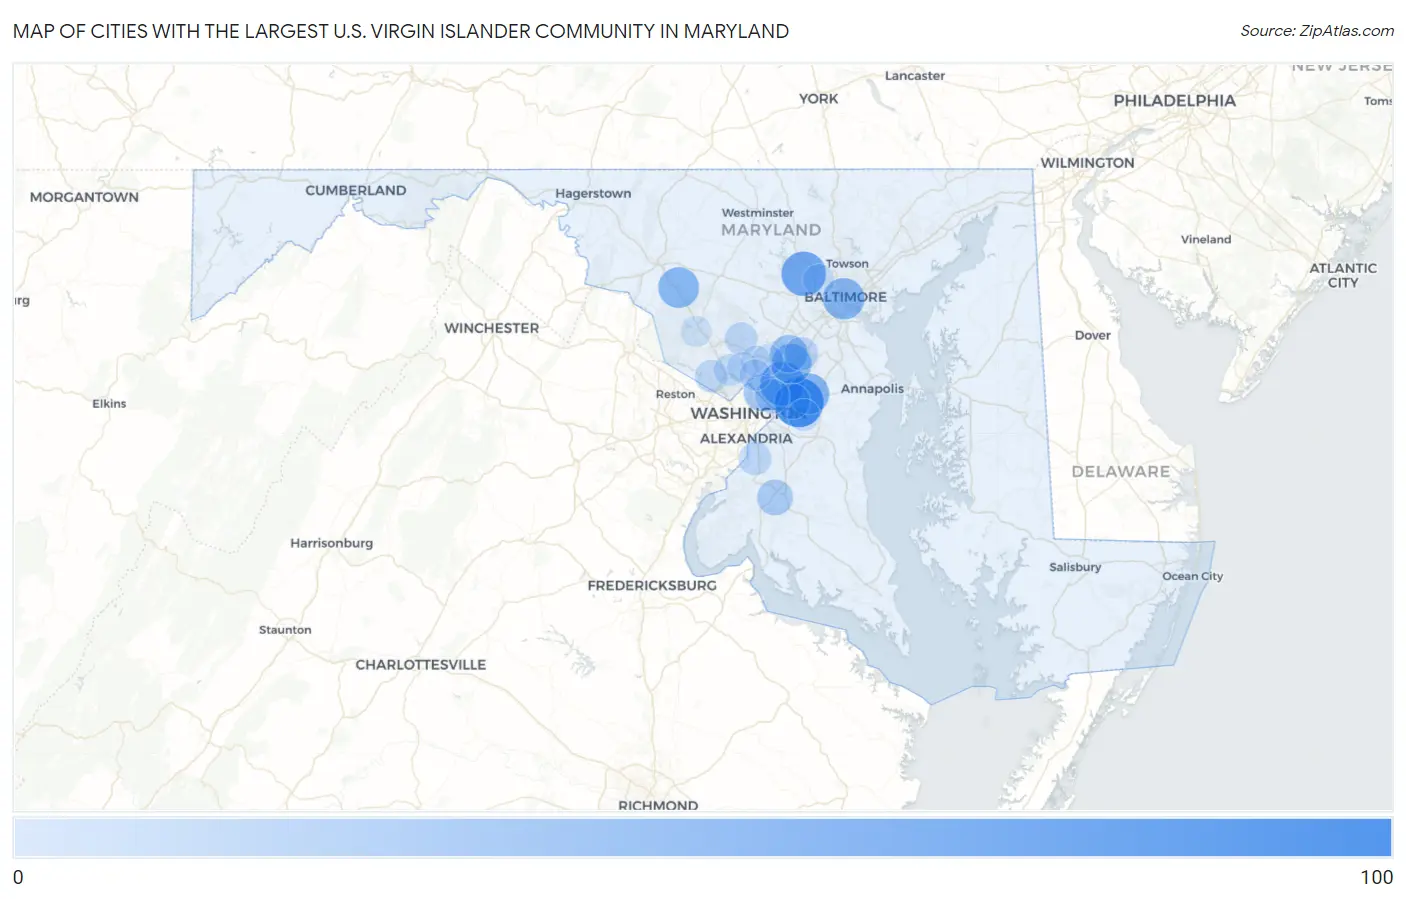 Cities with the Largest U.S. Virgin Islander Community in Maryland Map